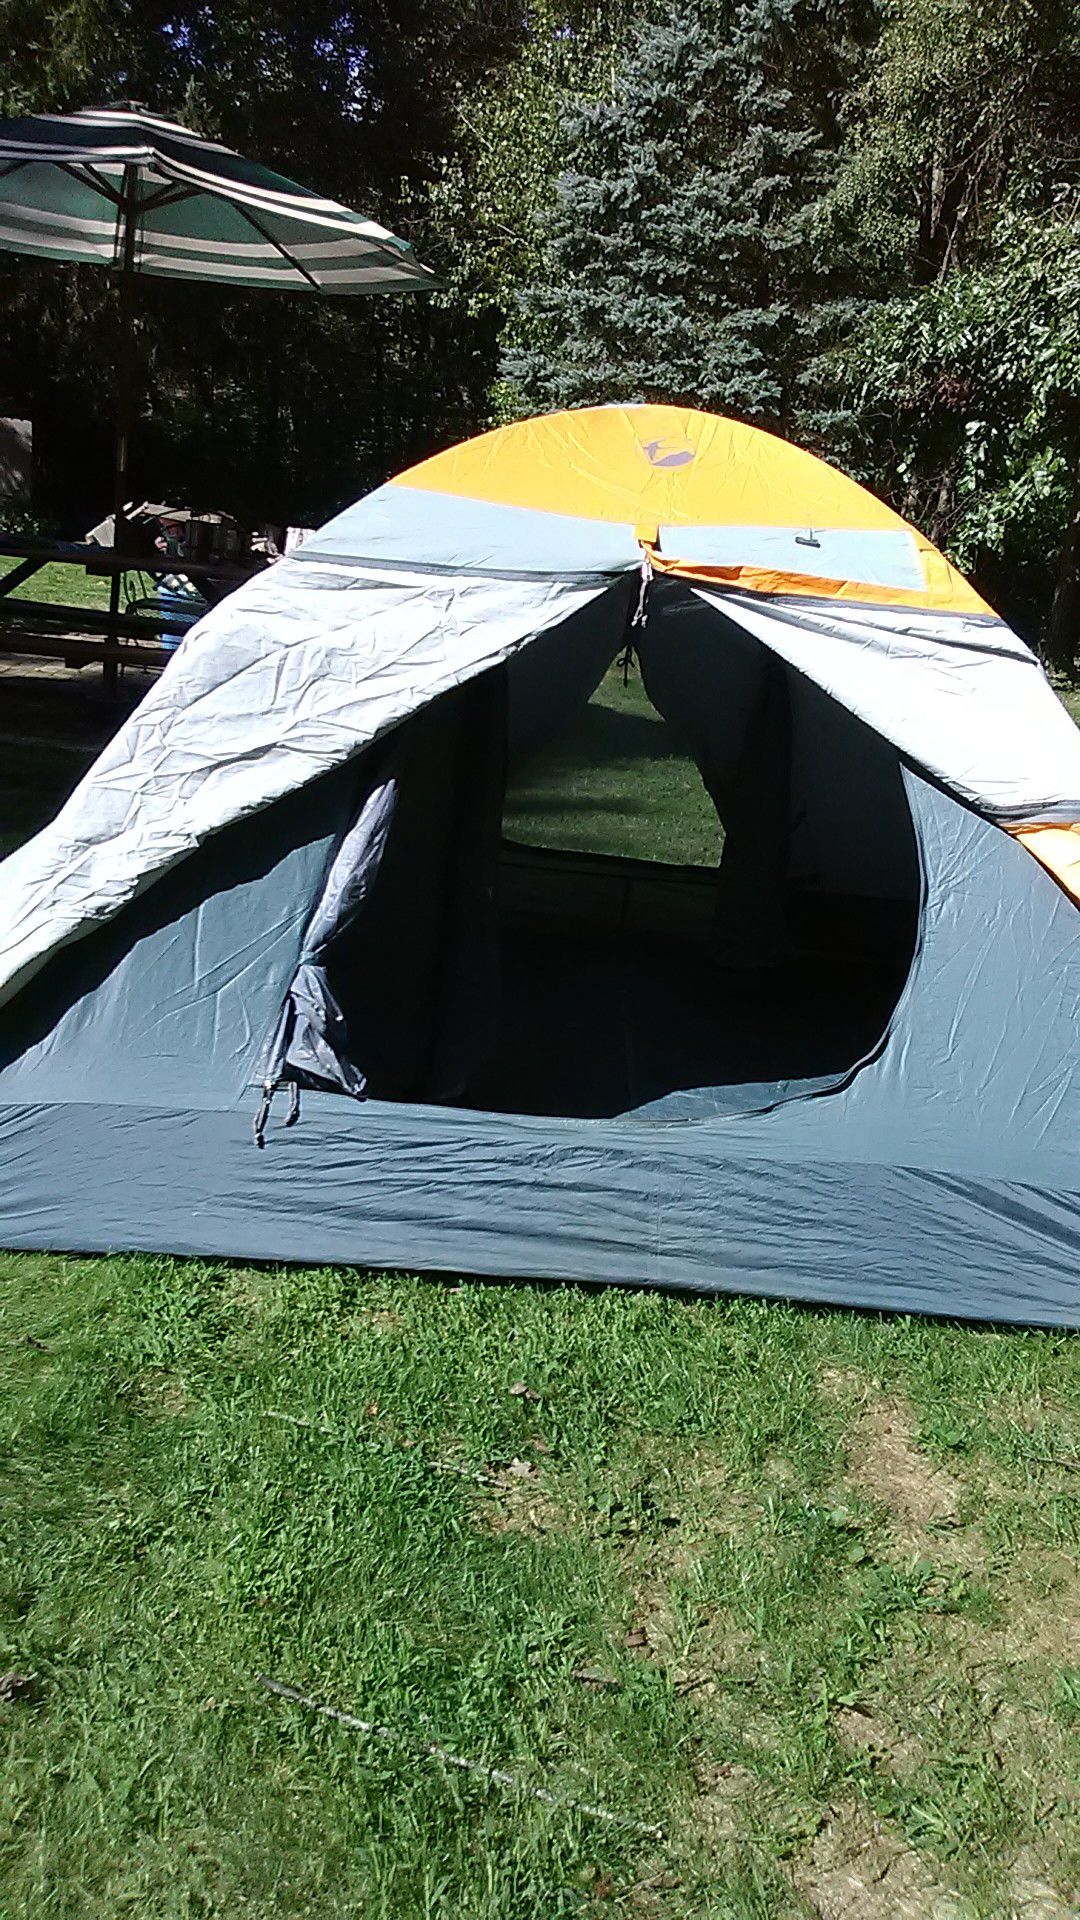 Gander Mt. Firefly 3 - all weather dome tent.